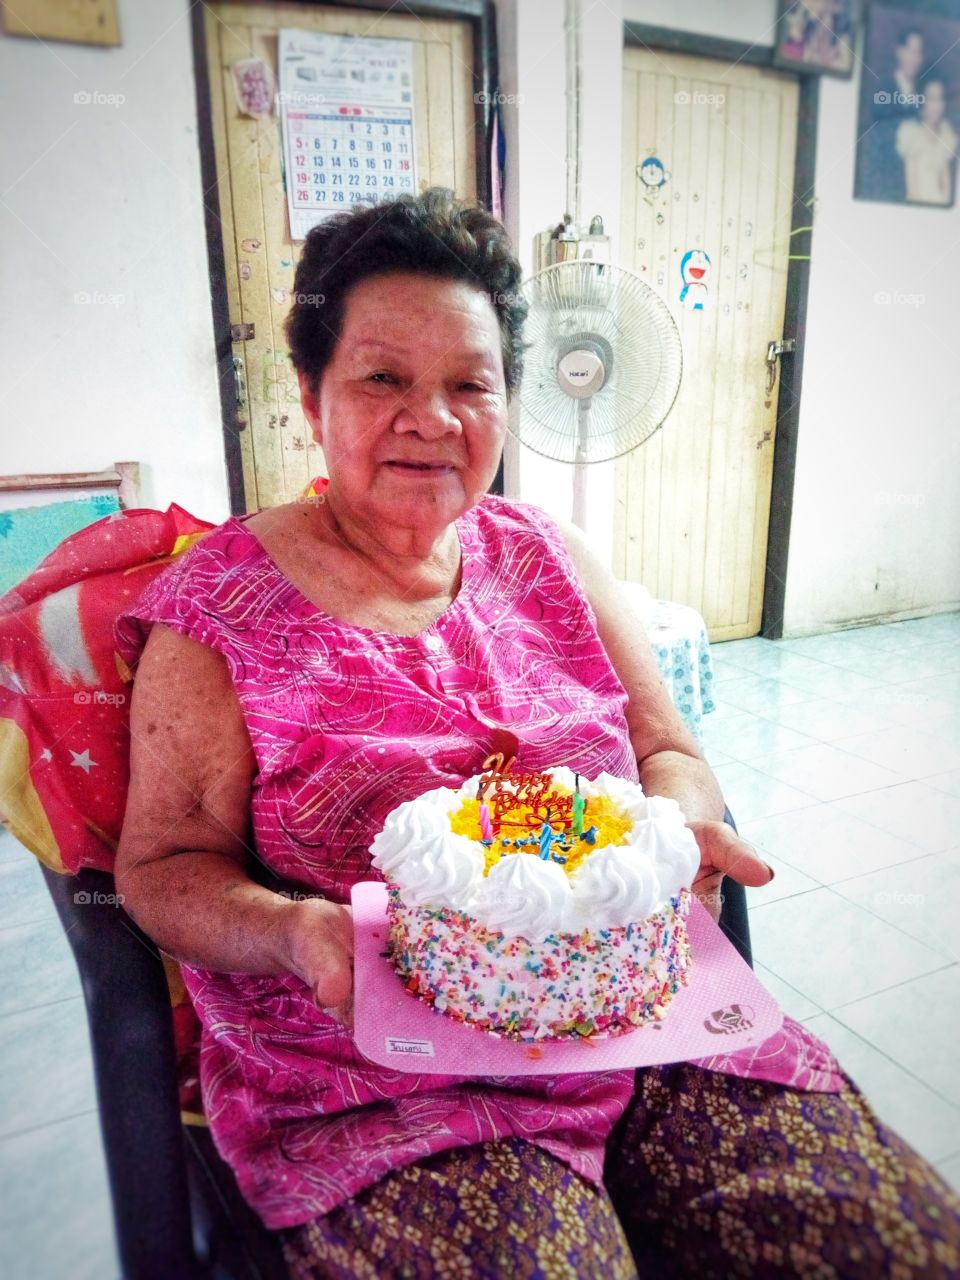 Grandma and delicious sweet cake.